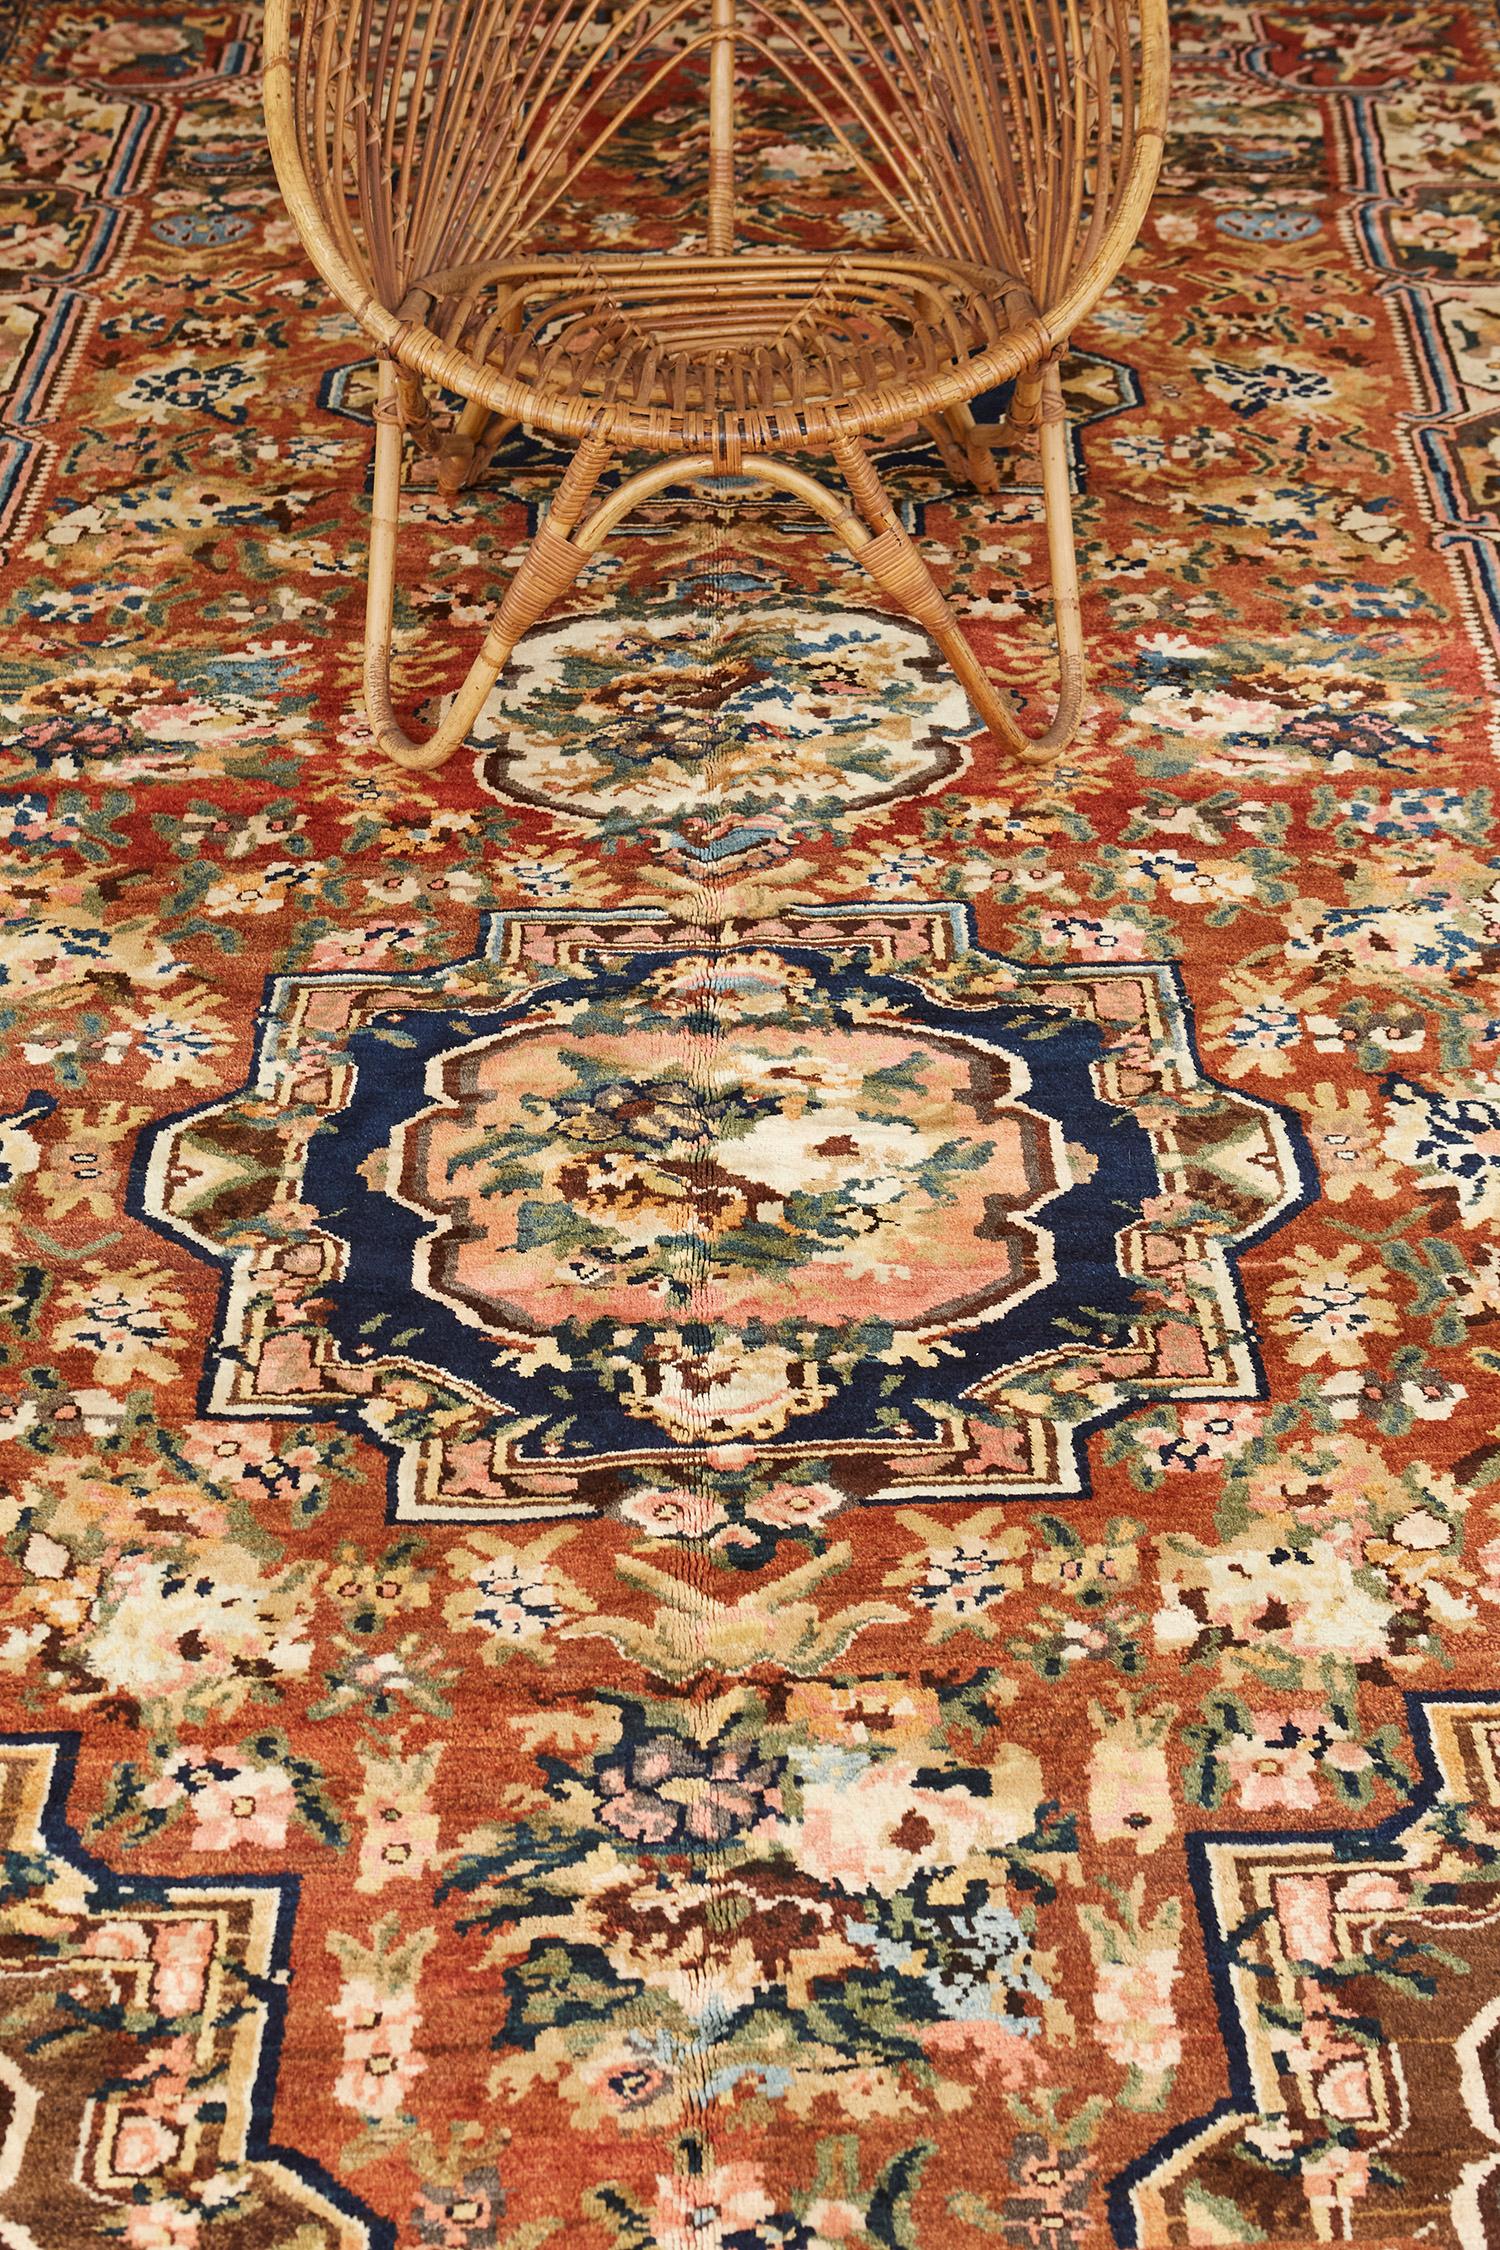 Featuring an interplay of stunning color palettes, this Antique Persian Bakhtiari Floral Design rug embodies a harmonious vibe captivating attention with its various design elements in an impeccable design. Effervescent geometric florals and